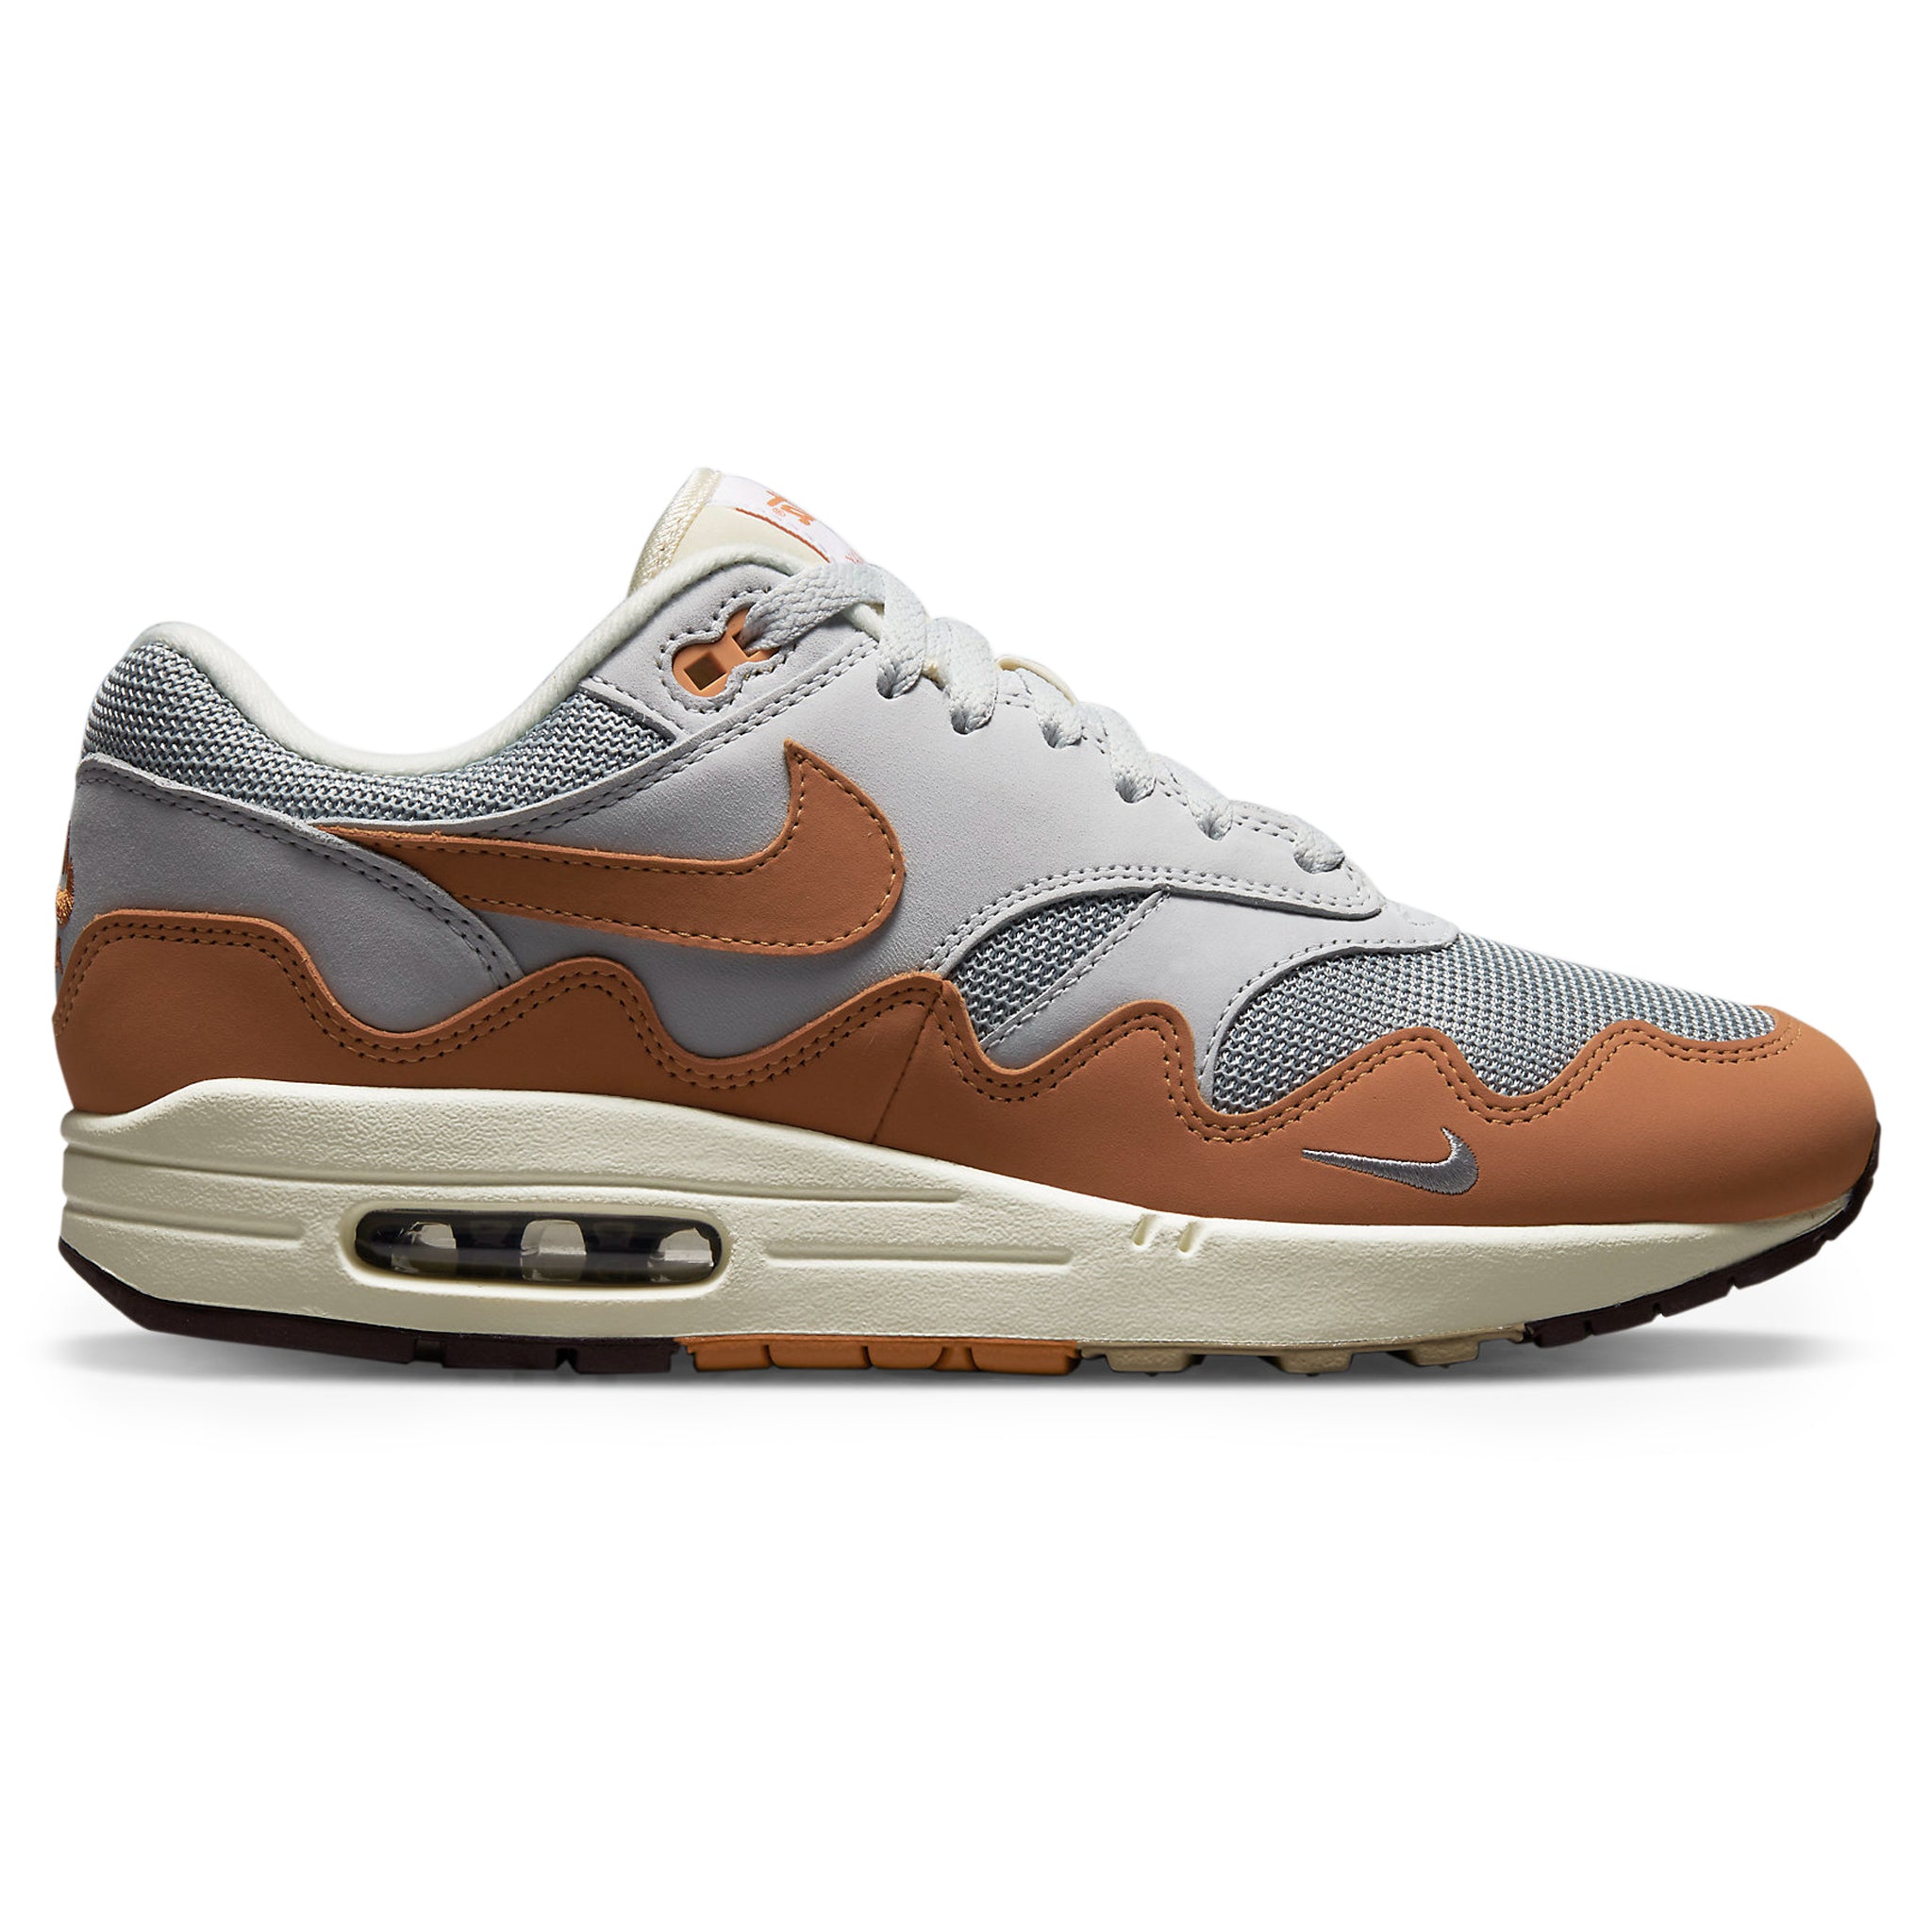 Side view of Nike Air Max 1 Patta Waves Monarch (With Bracelet) DH1348-001